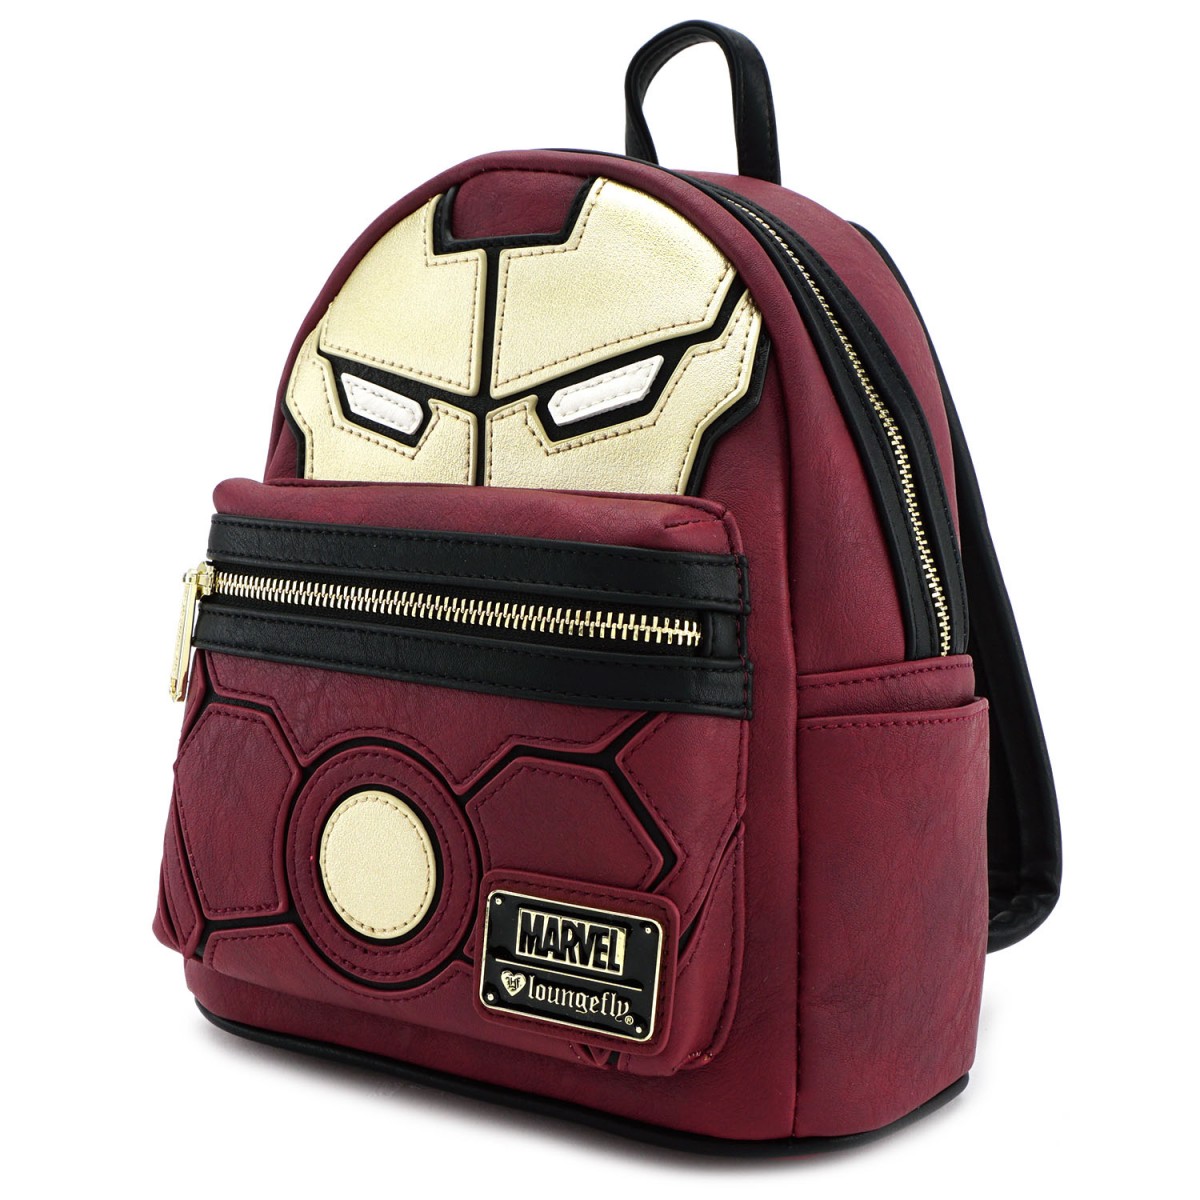 Loungefly Marvel Iron Man Faux Leather Mini Backpack